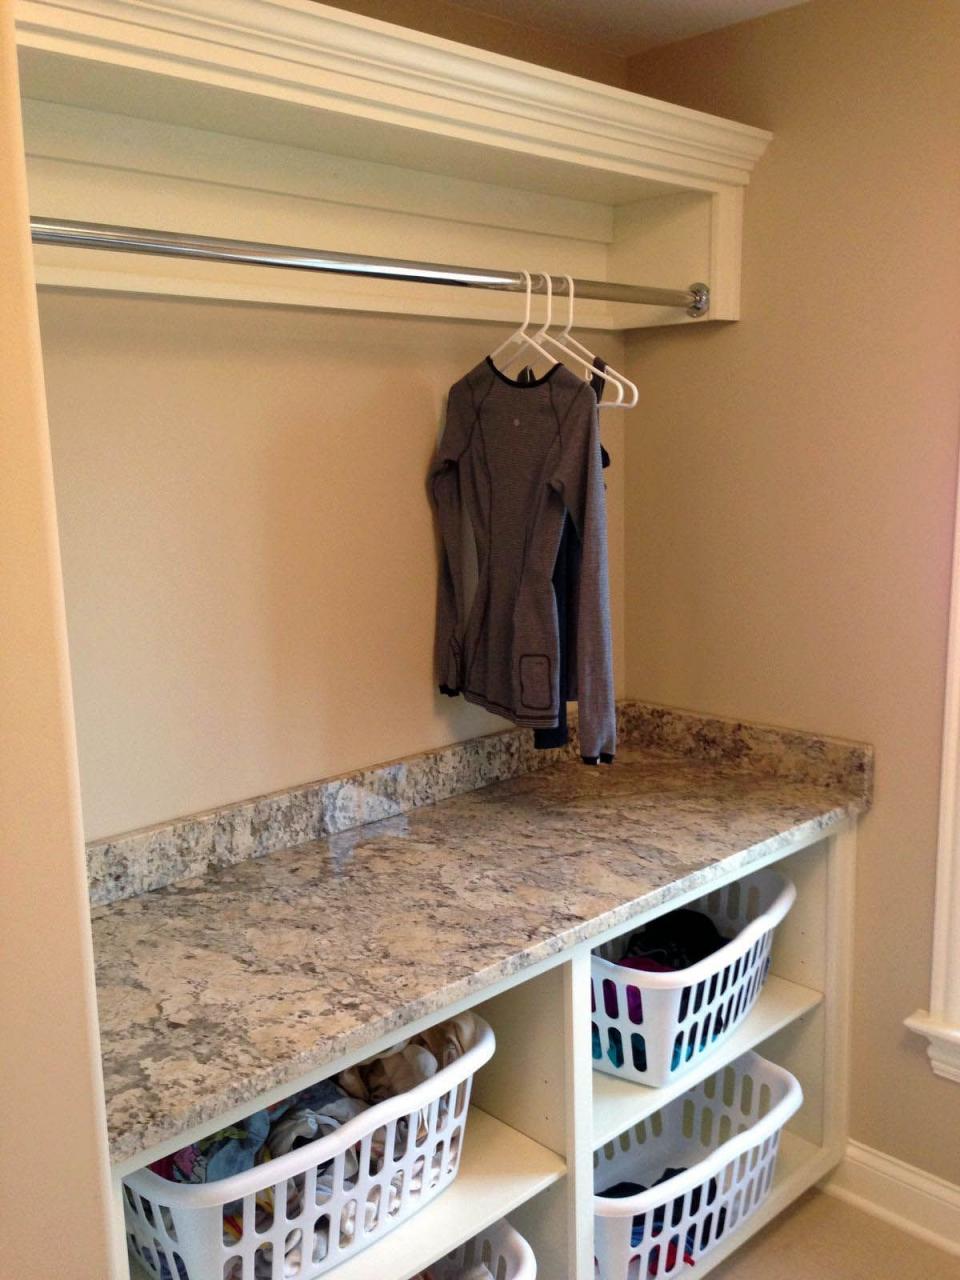 Laundry Room Ideas Wire Shelving laundy room ideas